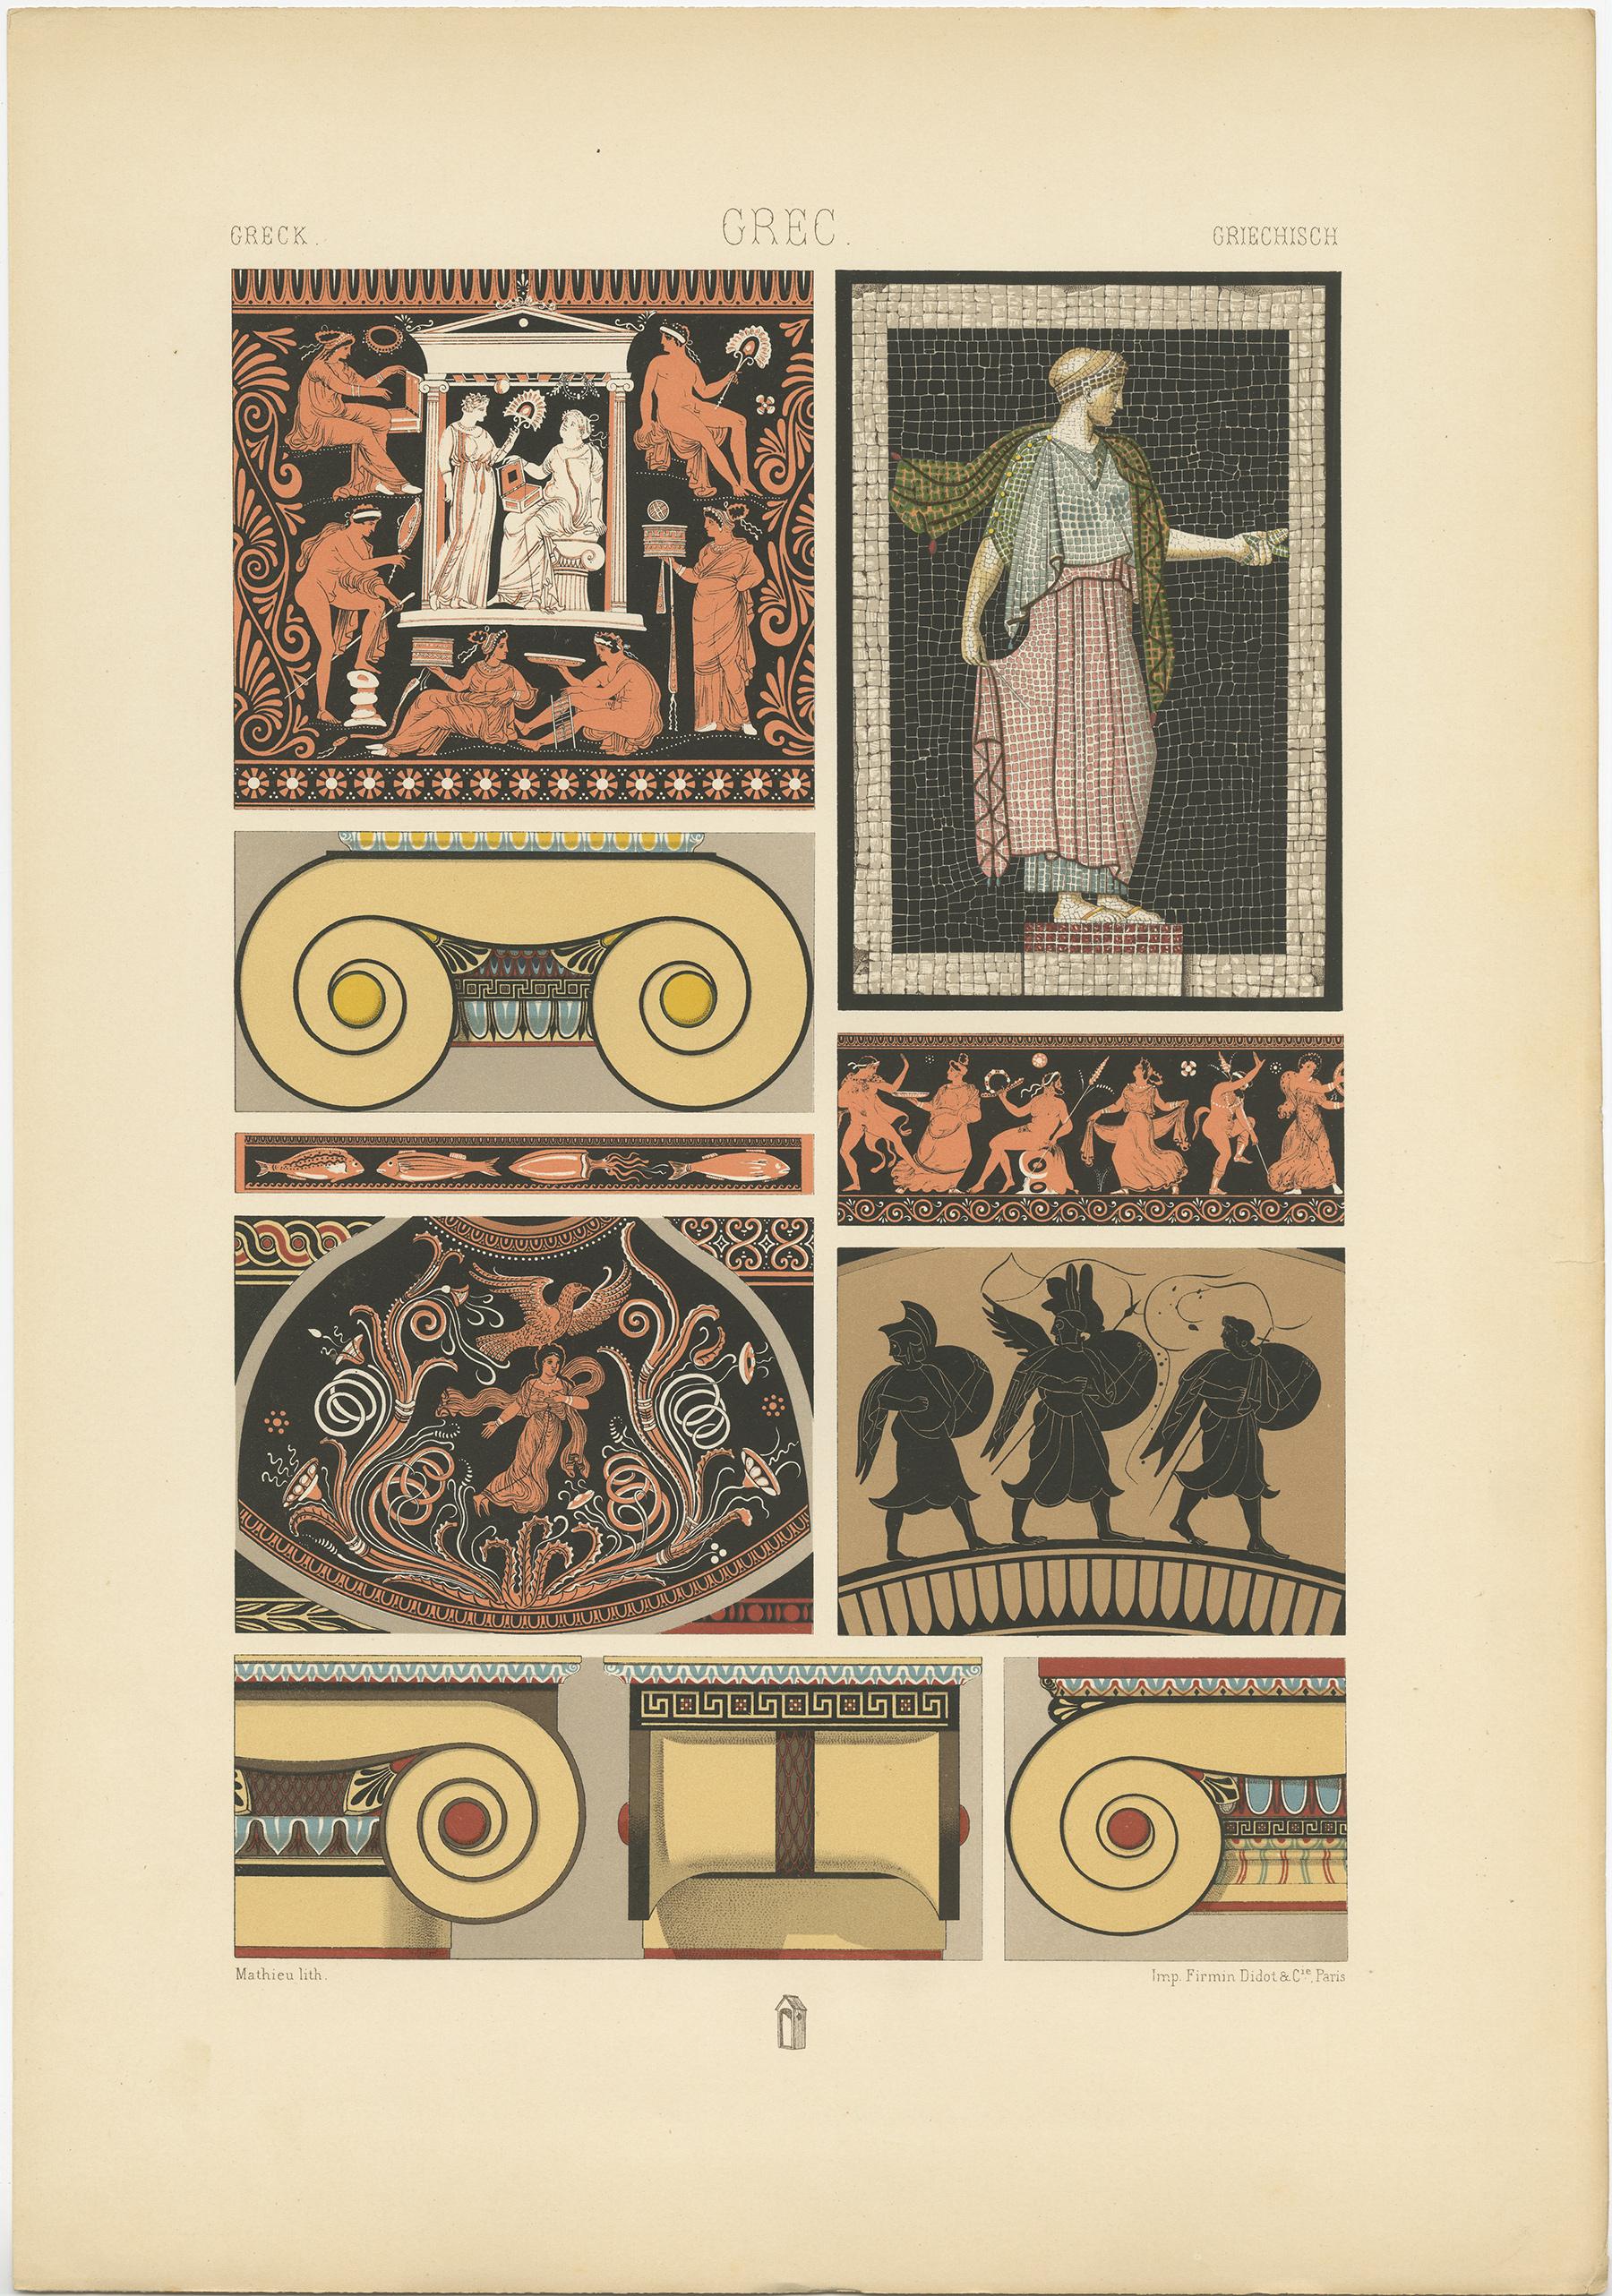 Antique print titled 'Greek - Grec - Griechisch'. Chromolithograph of Greek vase paintings, capitals and a Mosaic ornaments. This print originates from 'l'Ornement Polychrome' by Auguste Racinet. Published circa 1890.